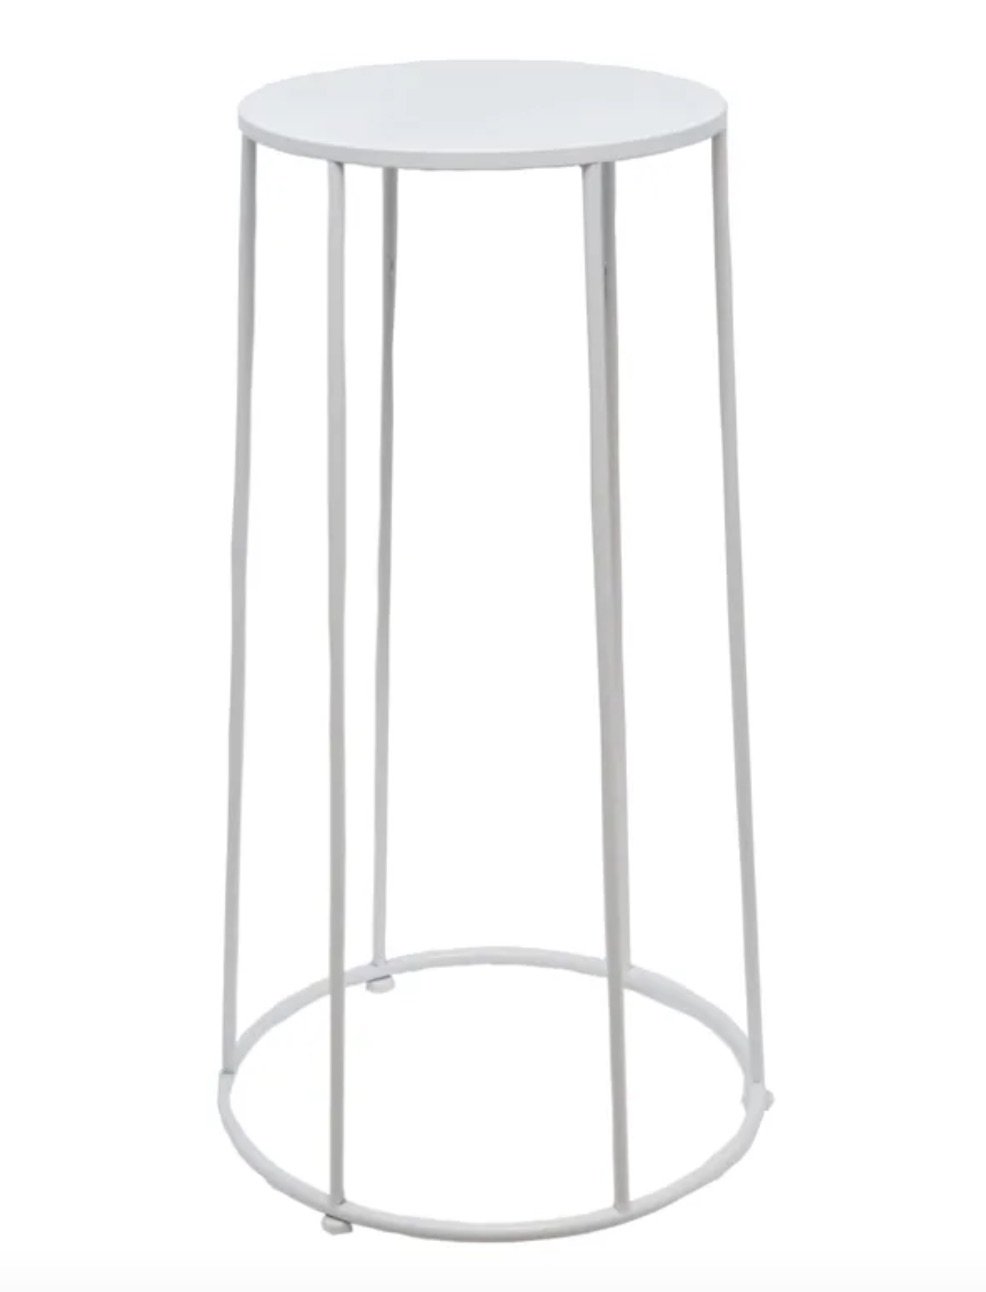 White Plant Stand Table